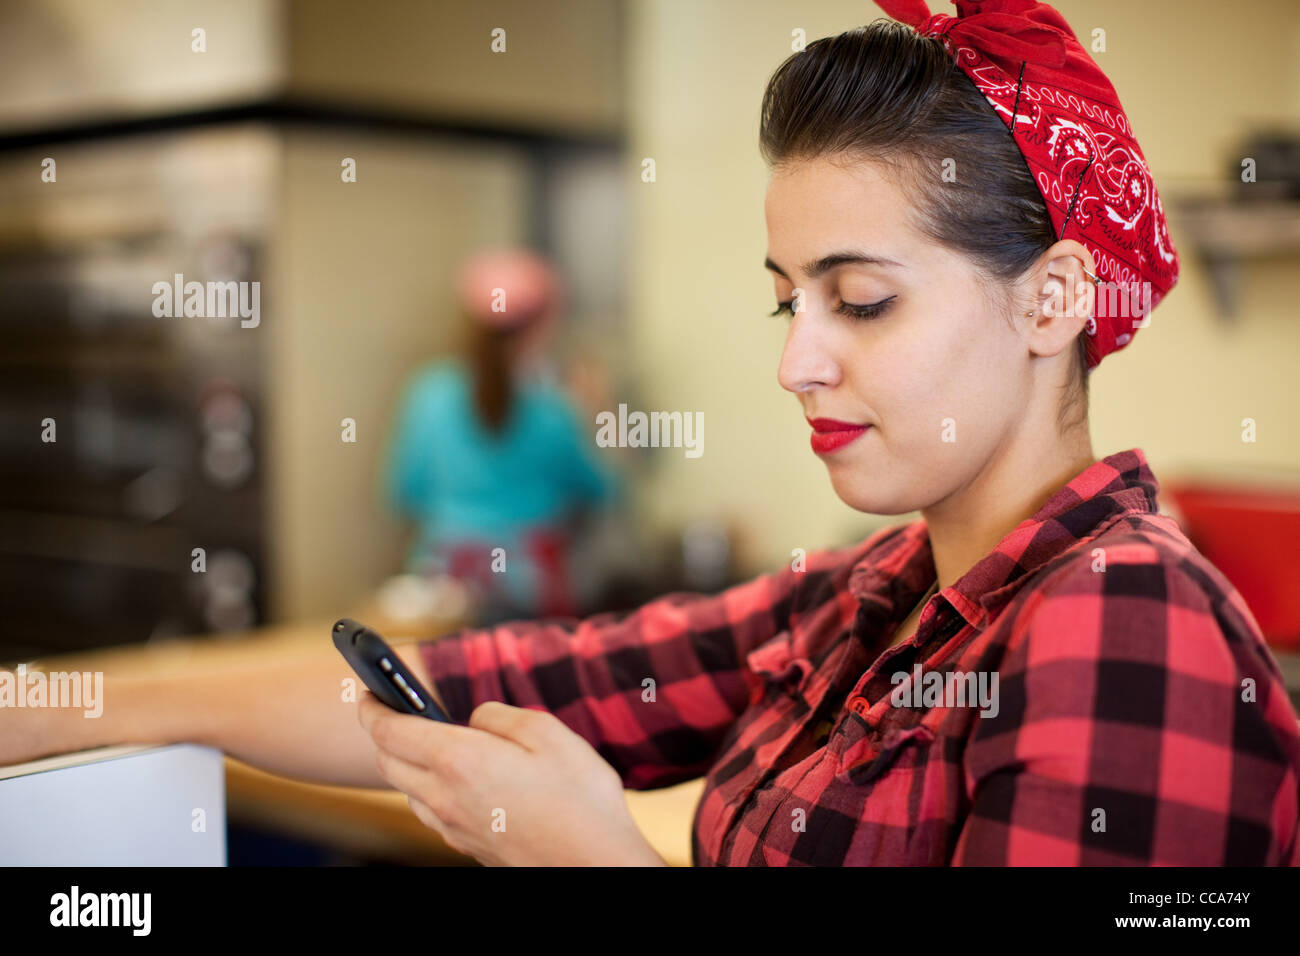 Young woman using cellphone in bakery Banque D'Images